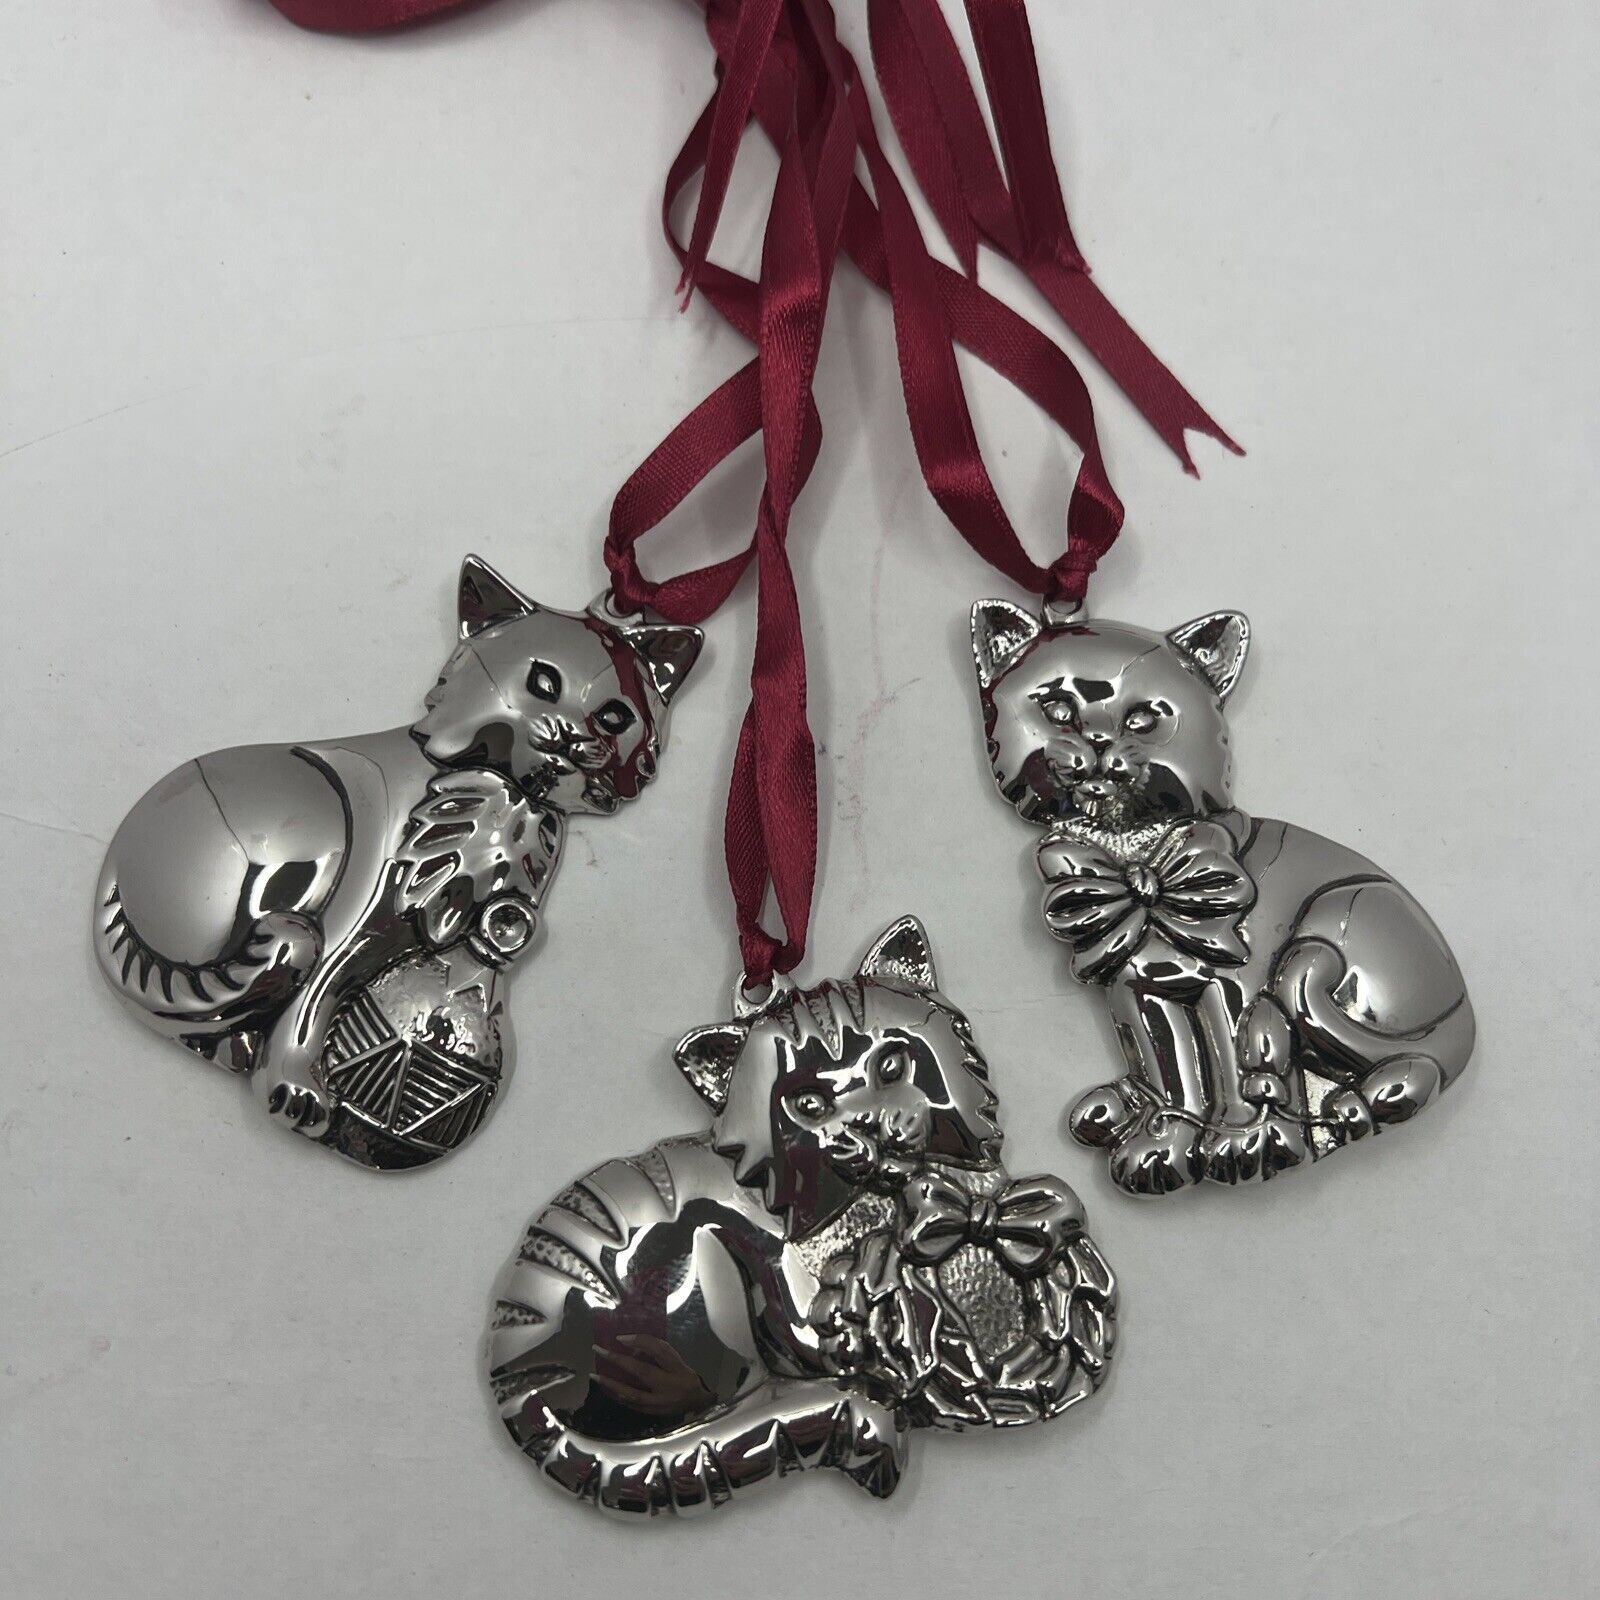 Vintage Gorham Set of 3 Cats Silver-plated Christmas Ornaments